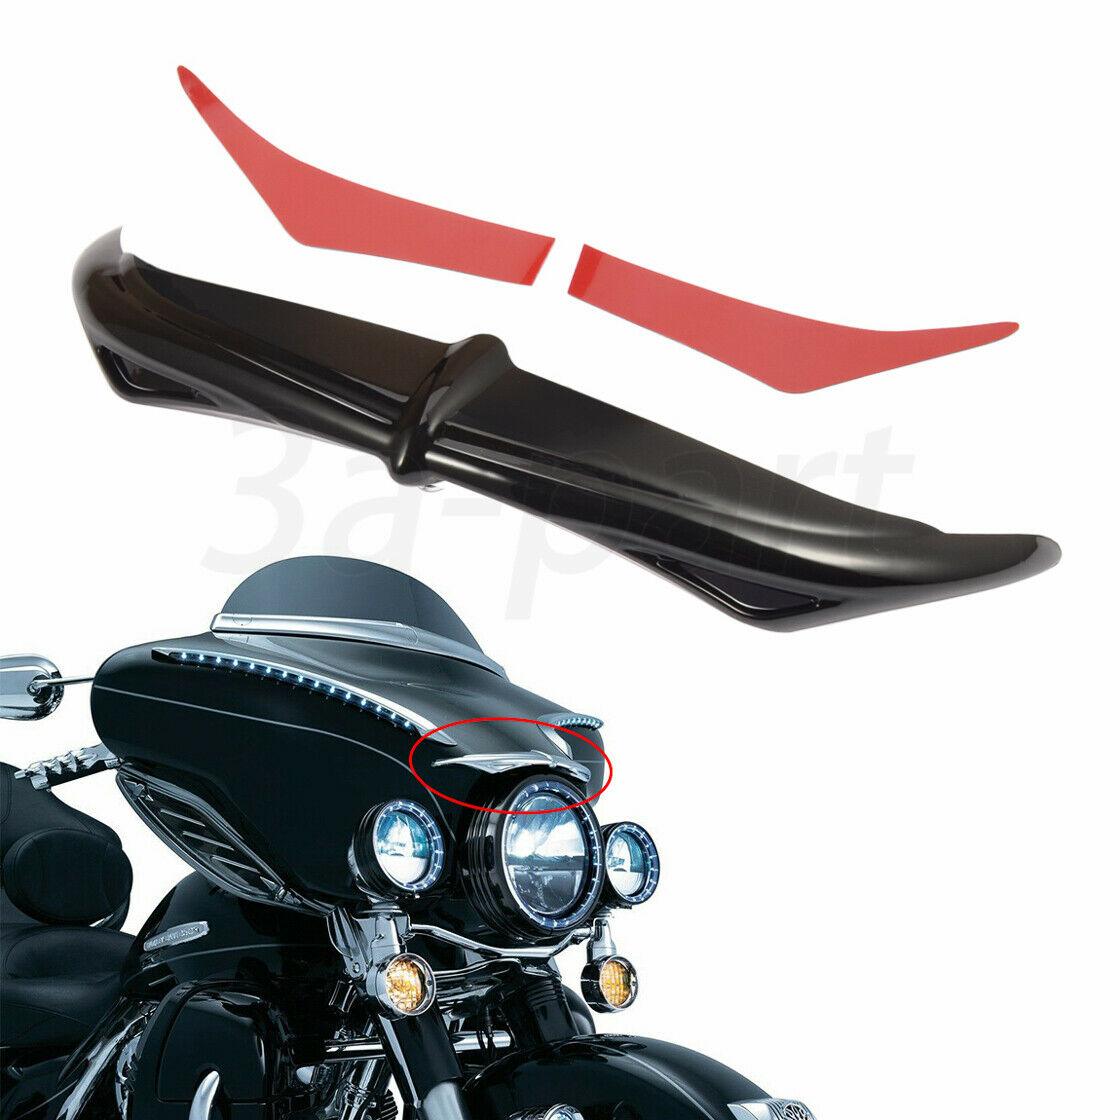 Black Bat Brow Fairing ABS Plastic Fit for Harley Tri Glide Street Glide 1996-13 - Moto Life Products